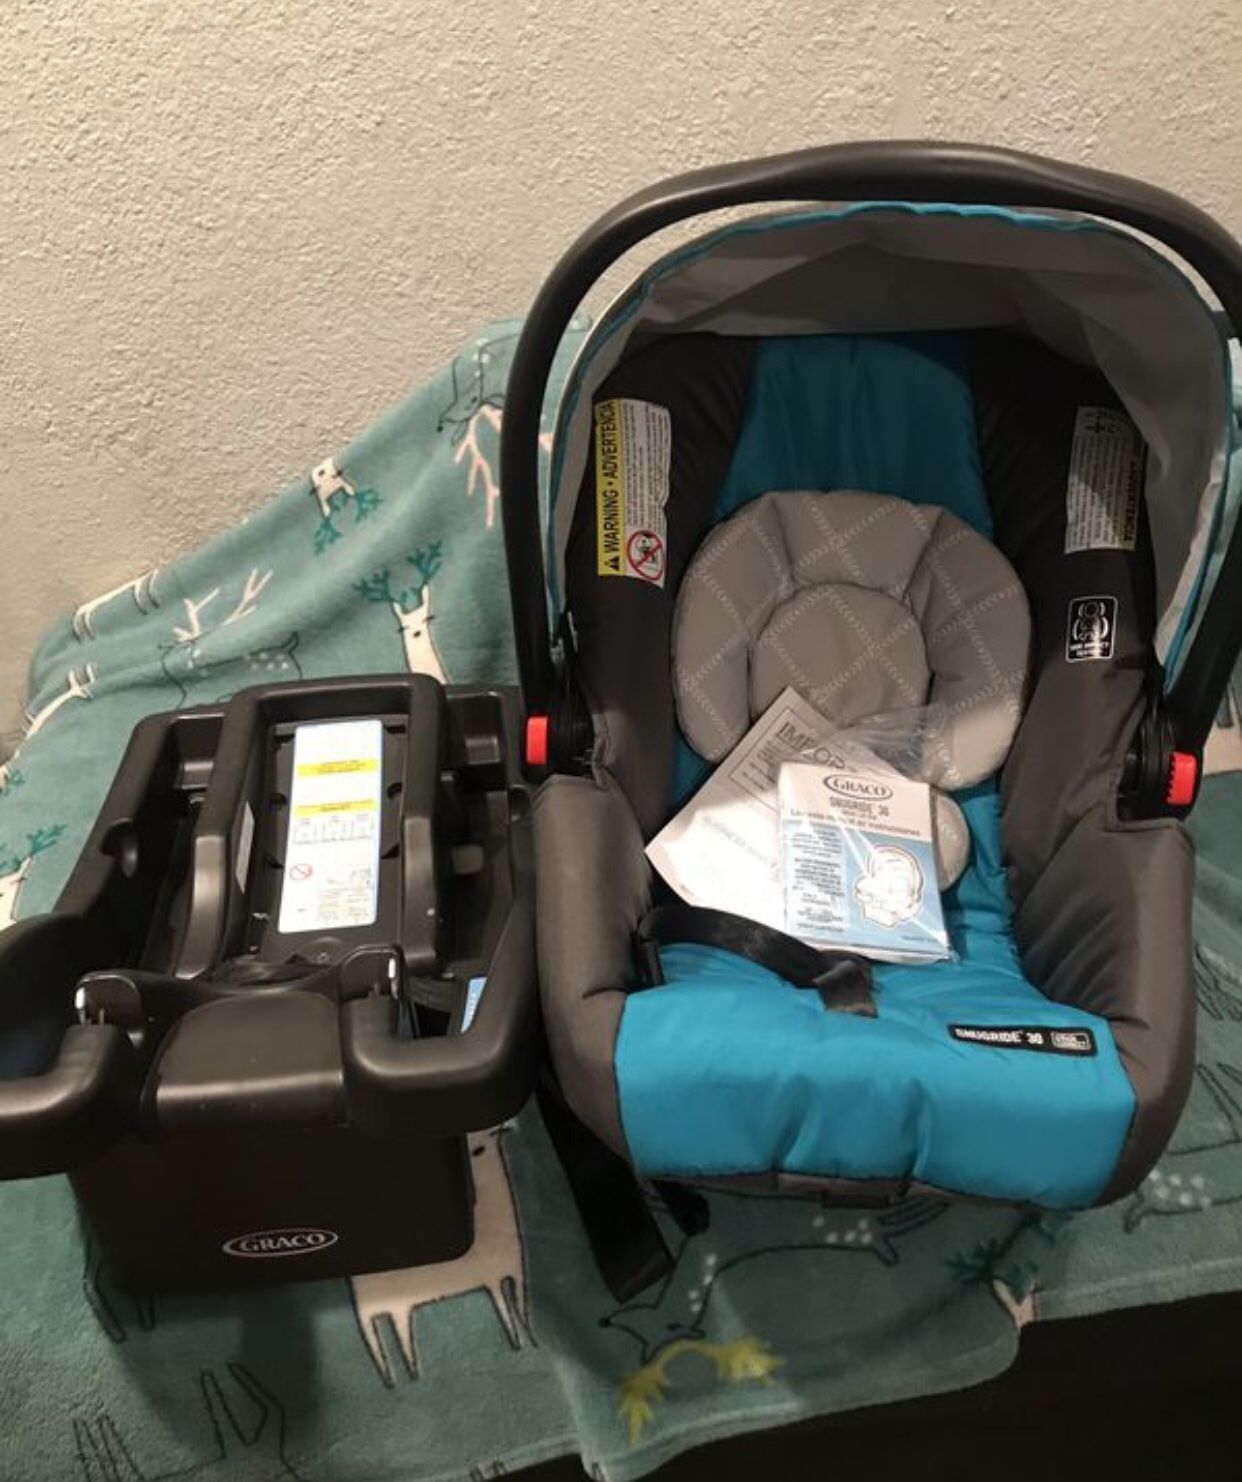 New graco car seat and base